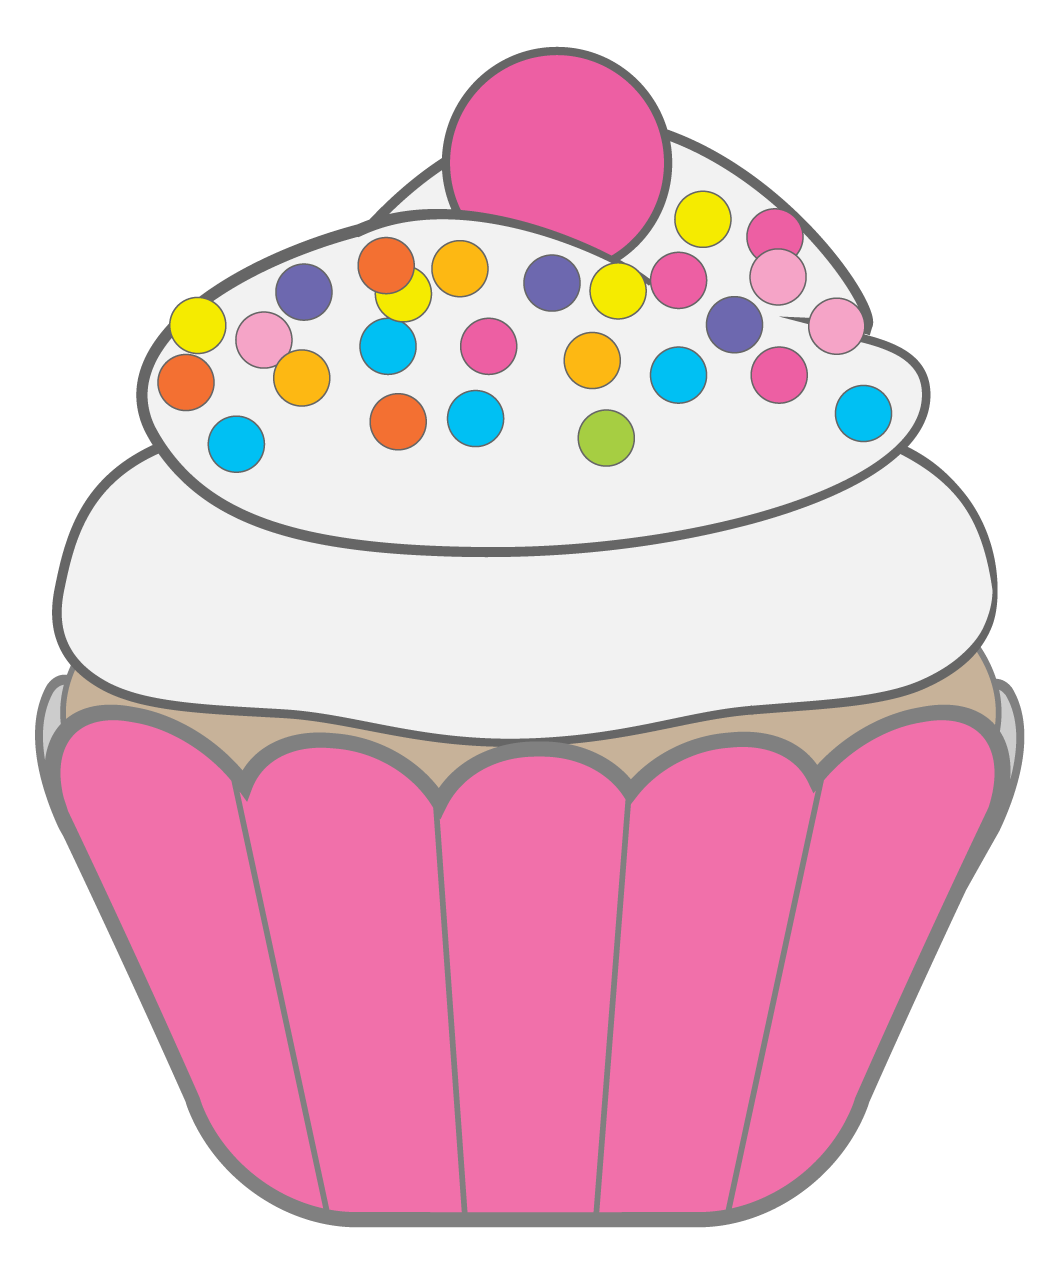 White clipart cupcake. Cupcakes muffins by carol